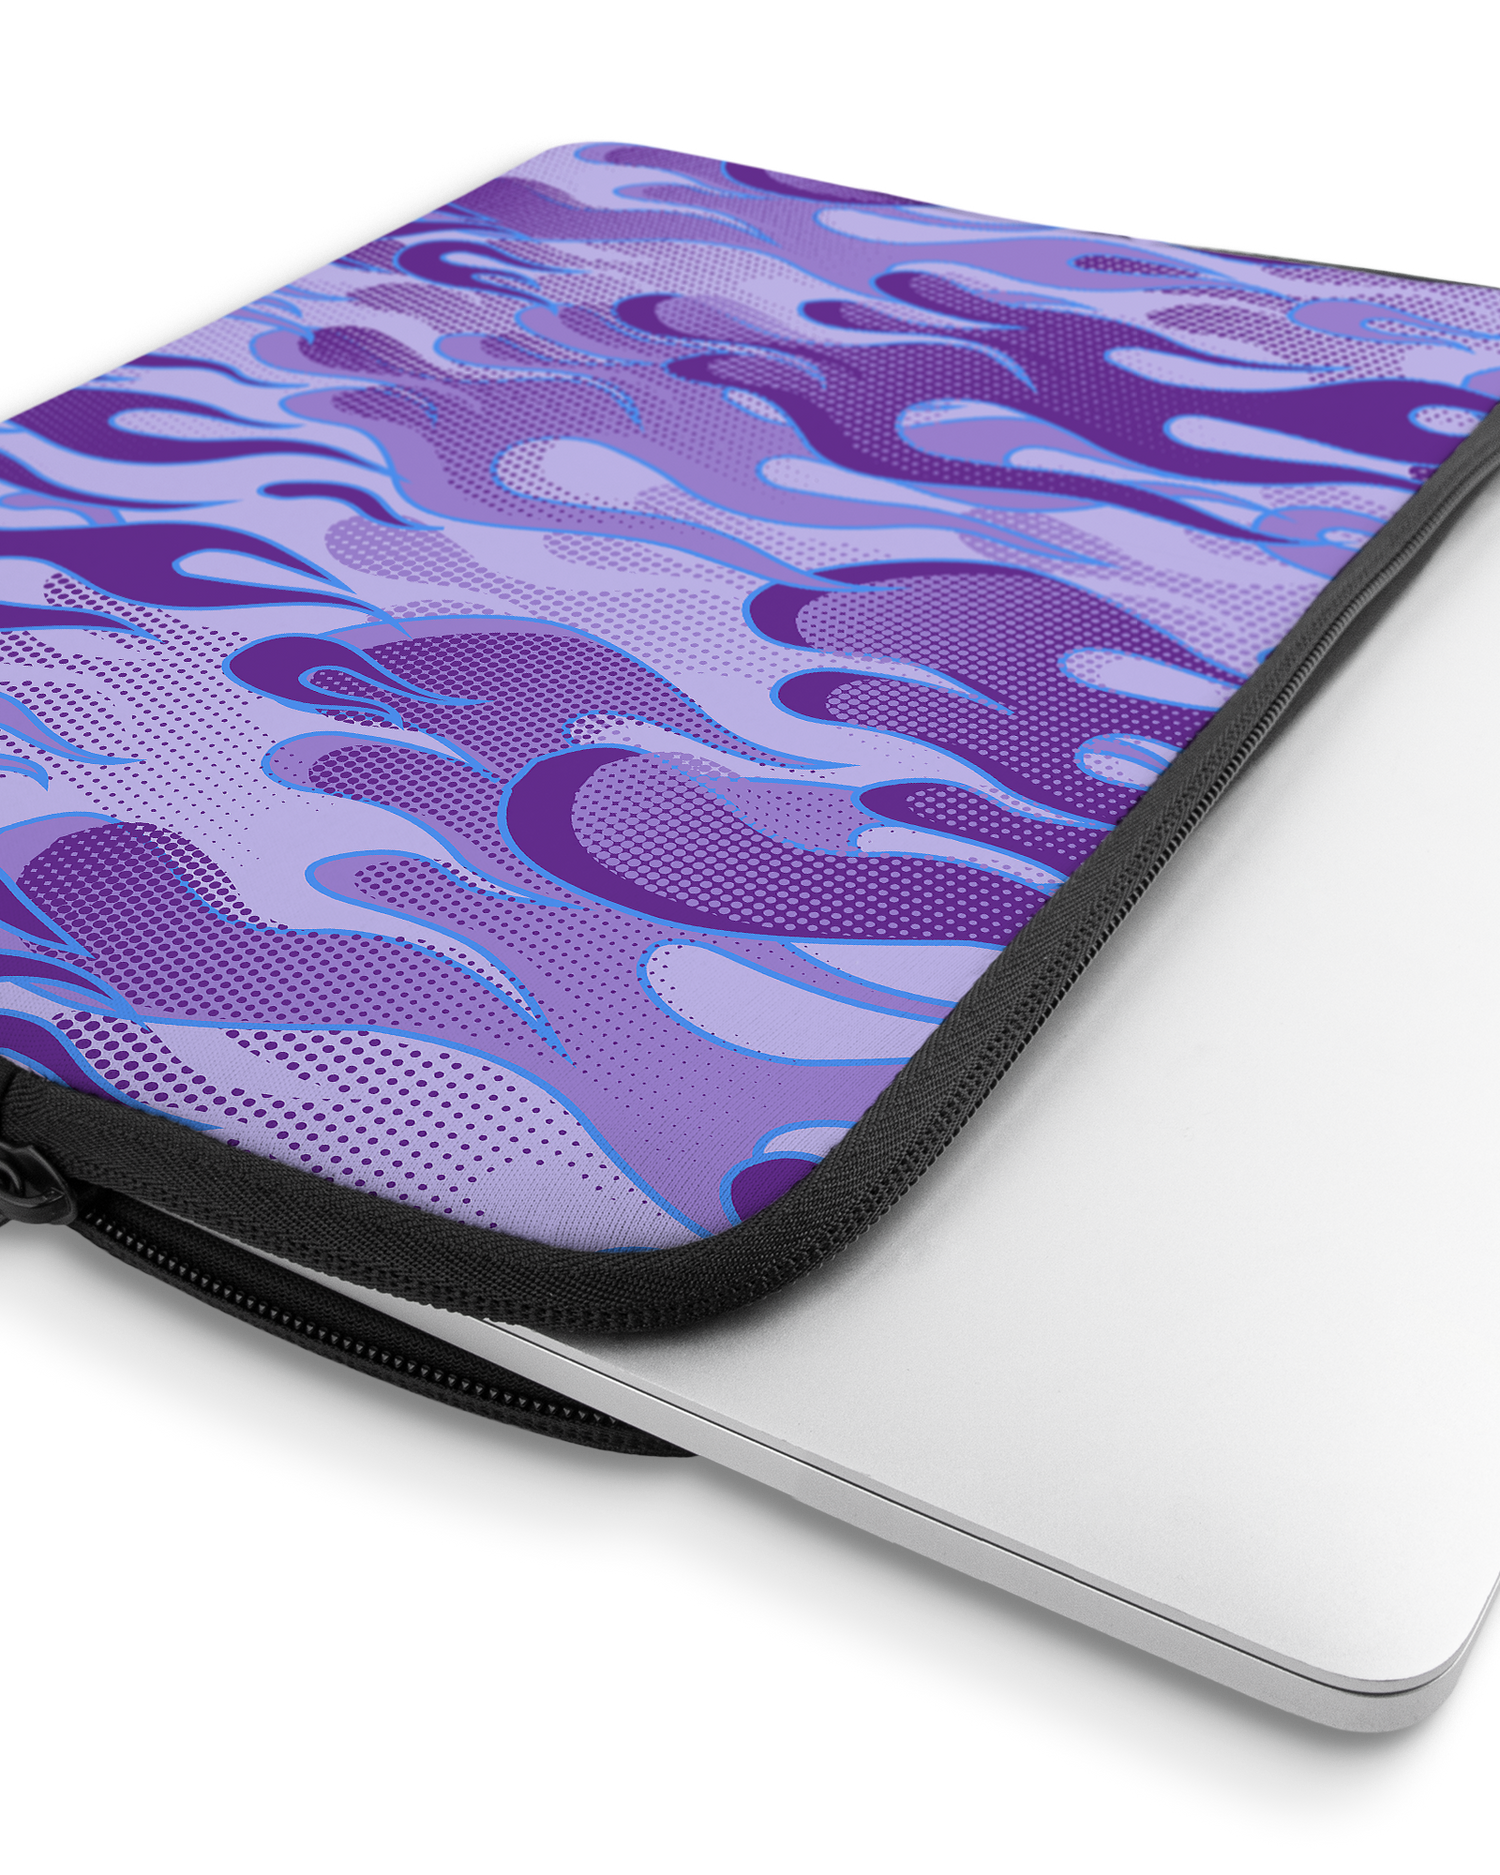 Purple Flames Laptop Case 13 inch with device inside